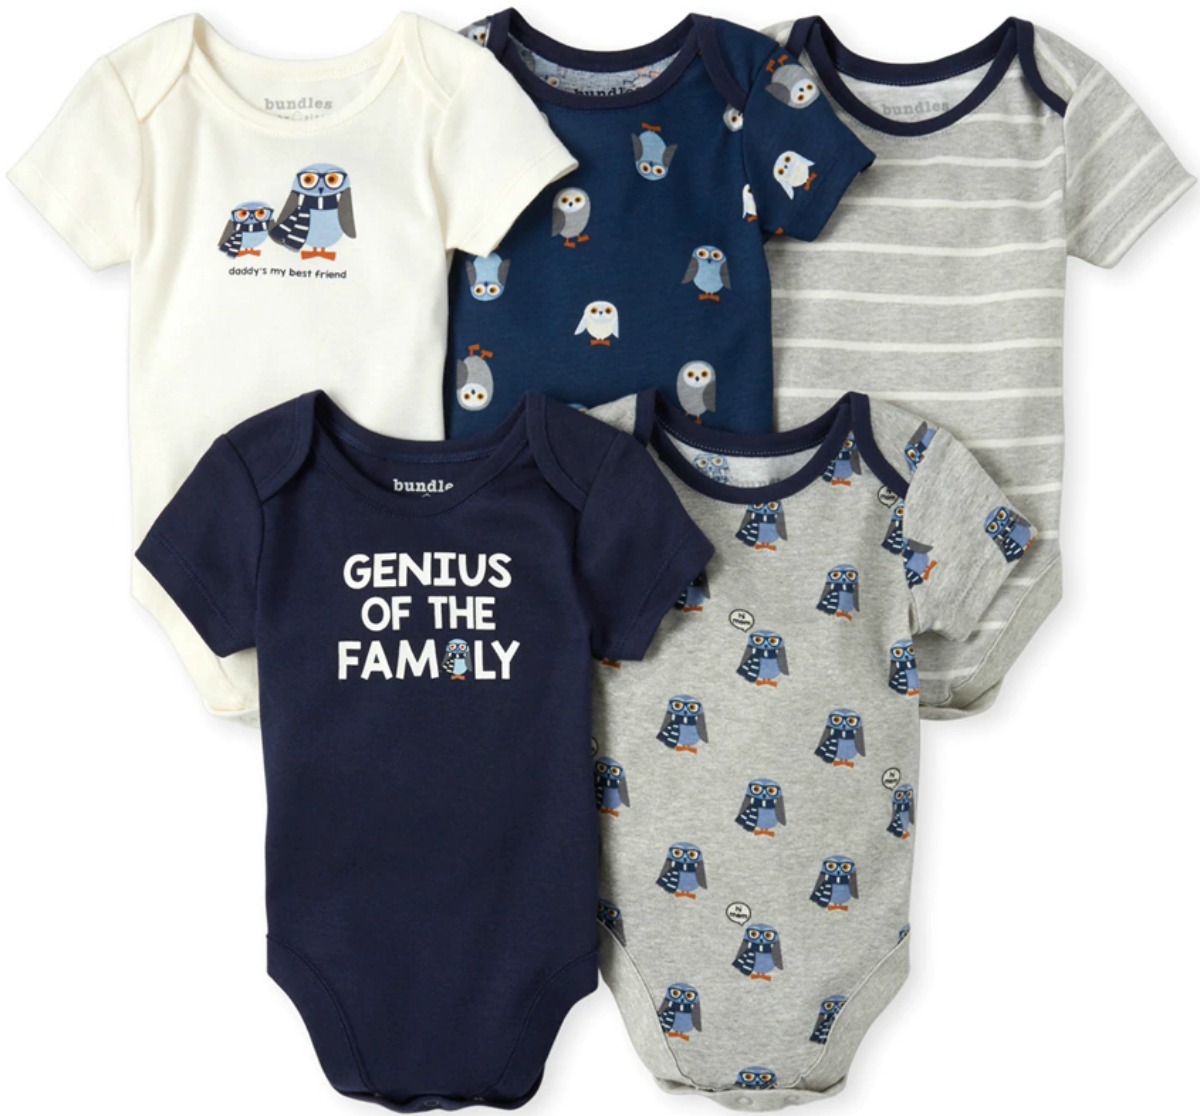 Five coordinating owl-themed baby boys bodysuits in navy blue and white